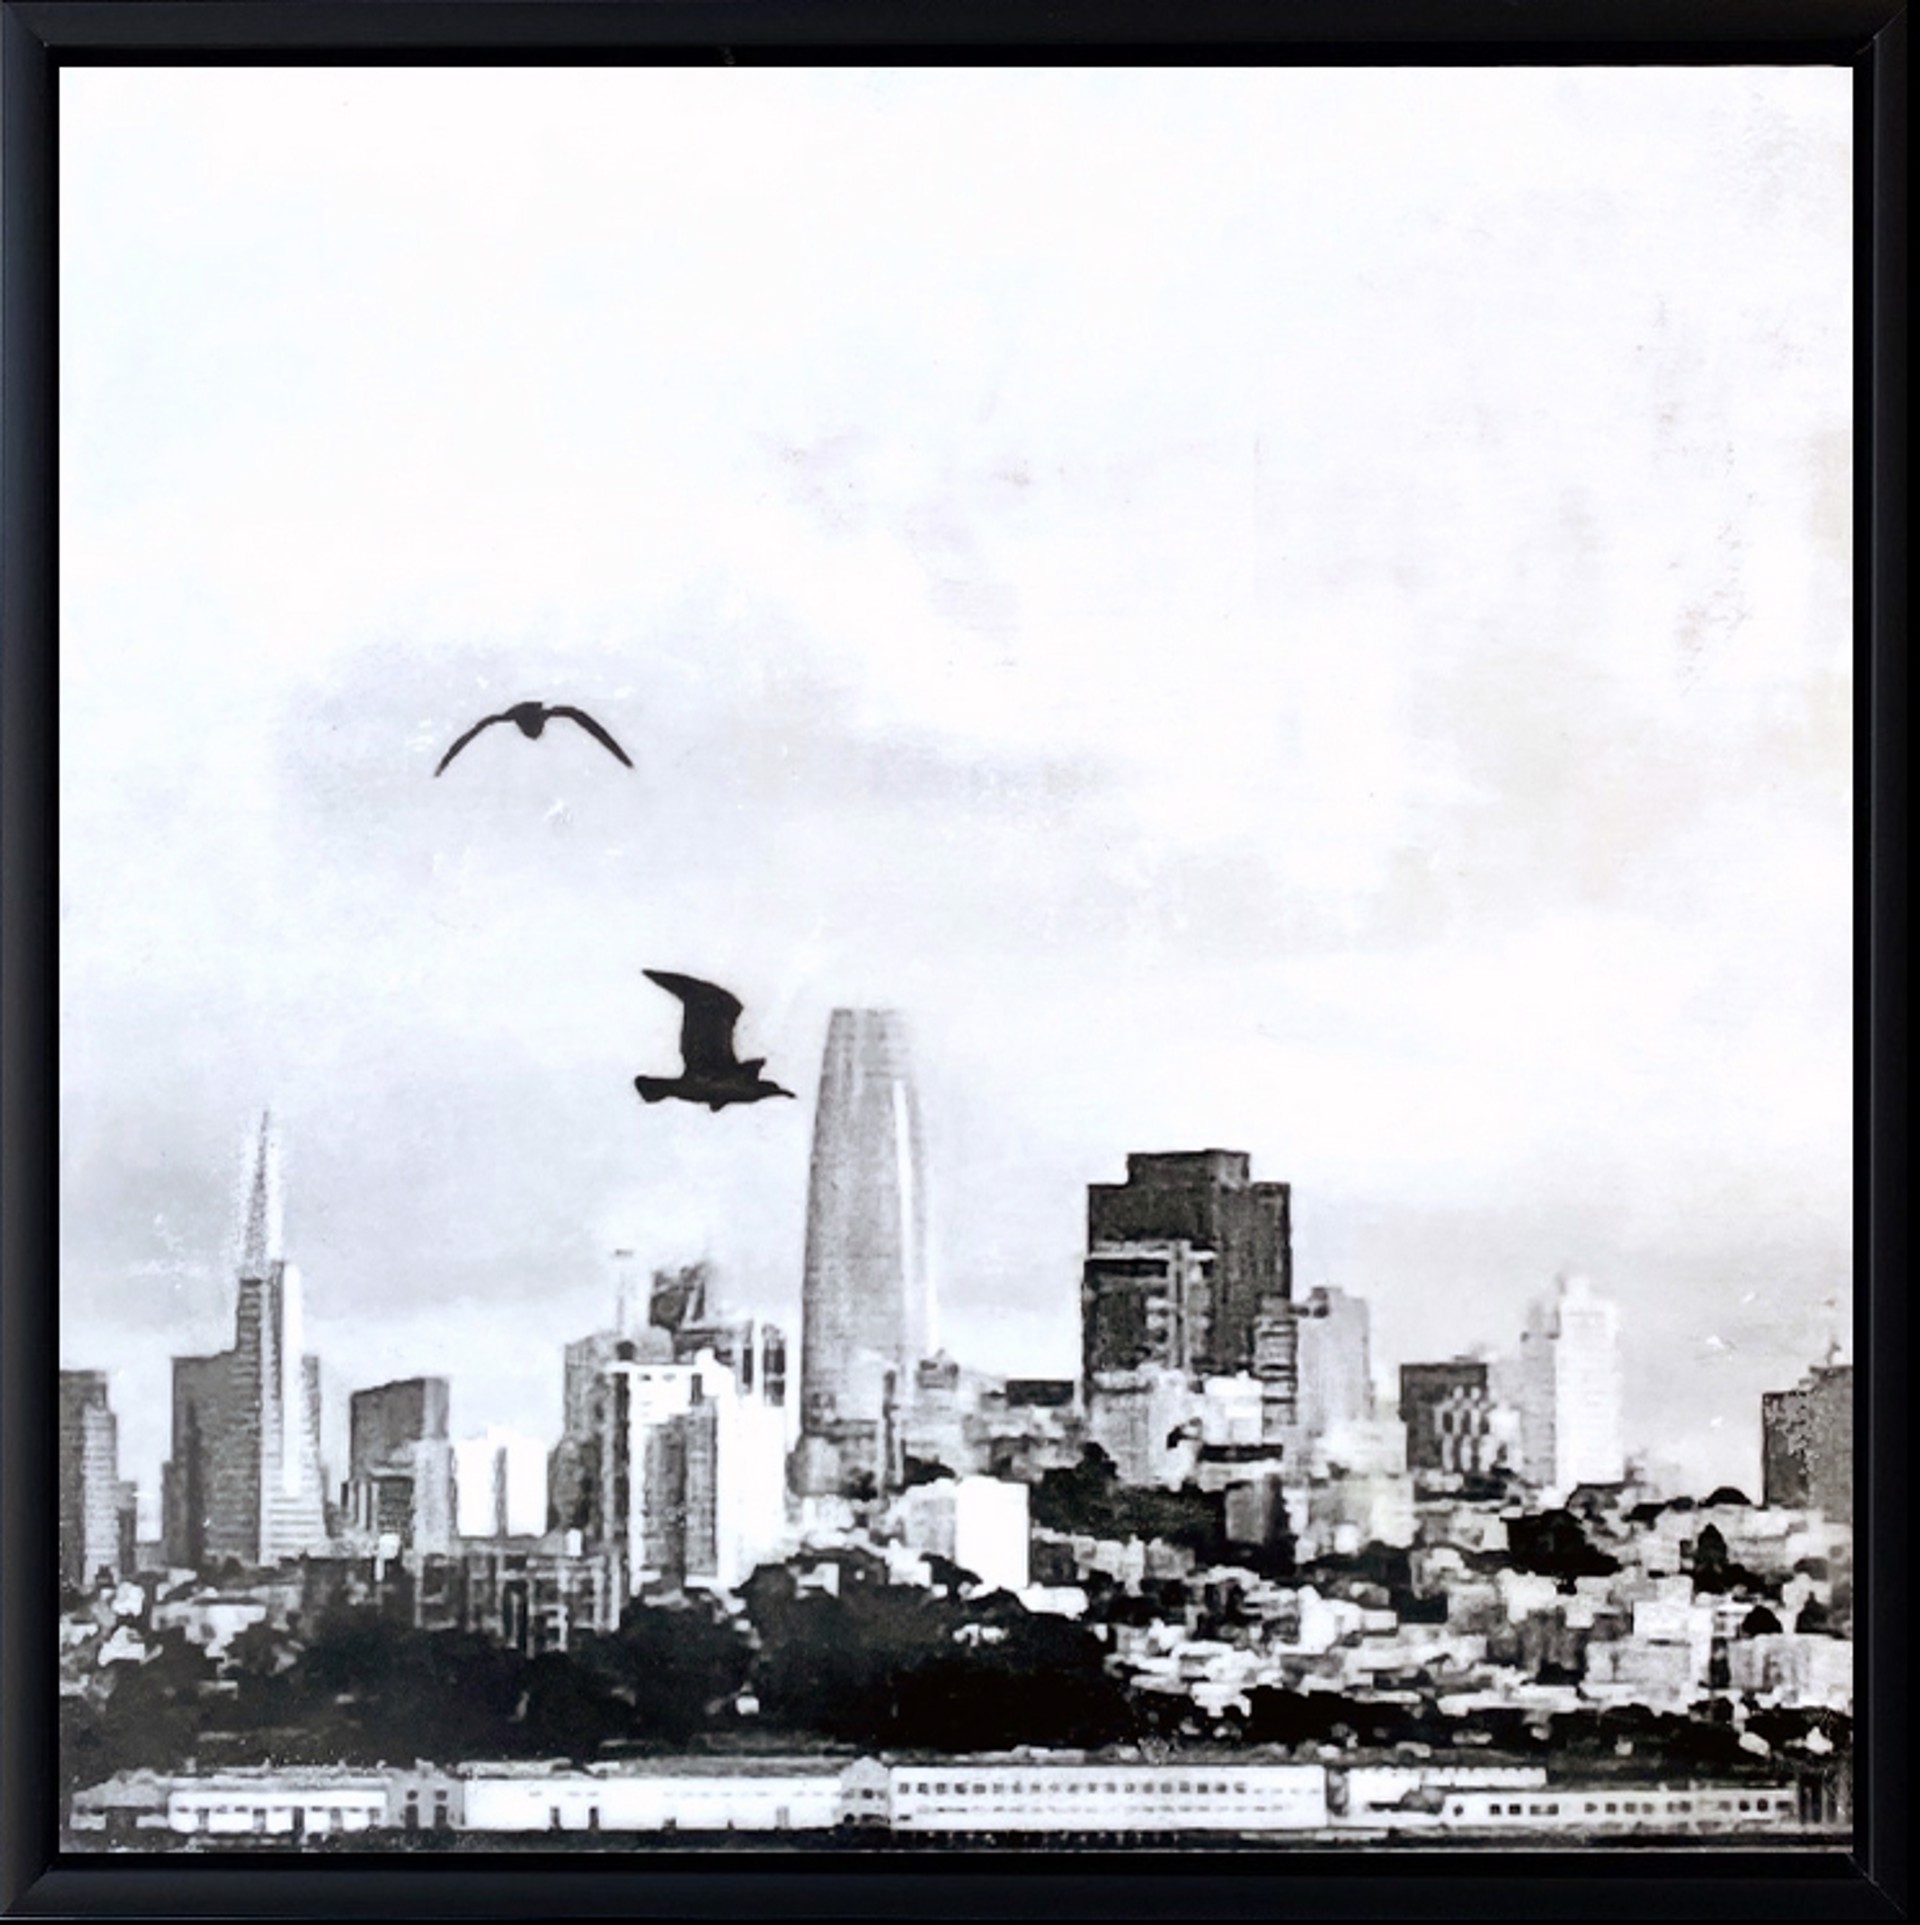 SF Waterfront with Two Birds by Suzie Buchholz